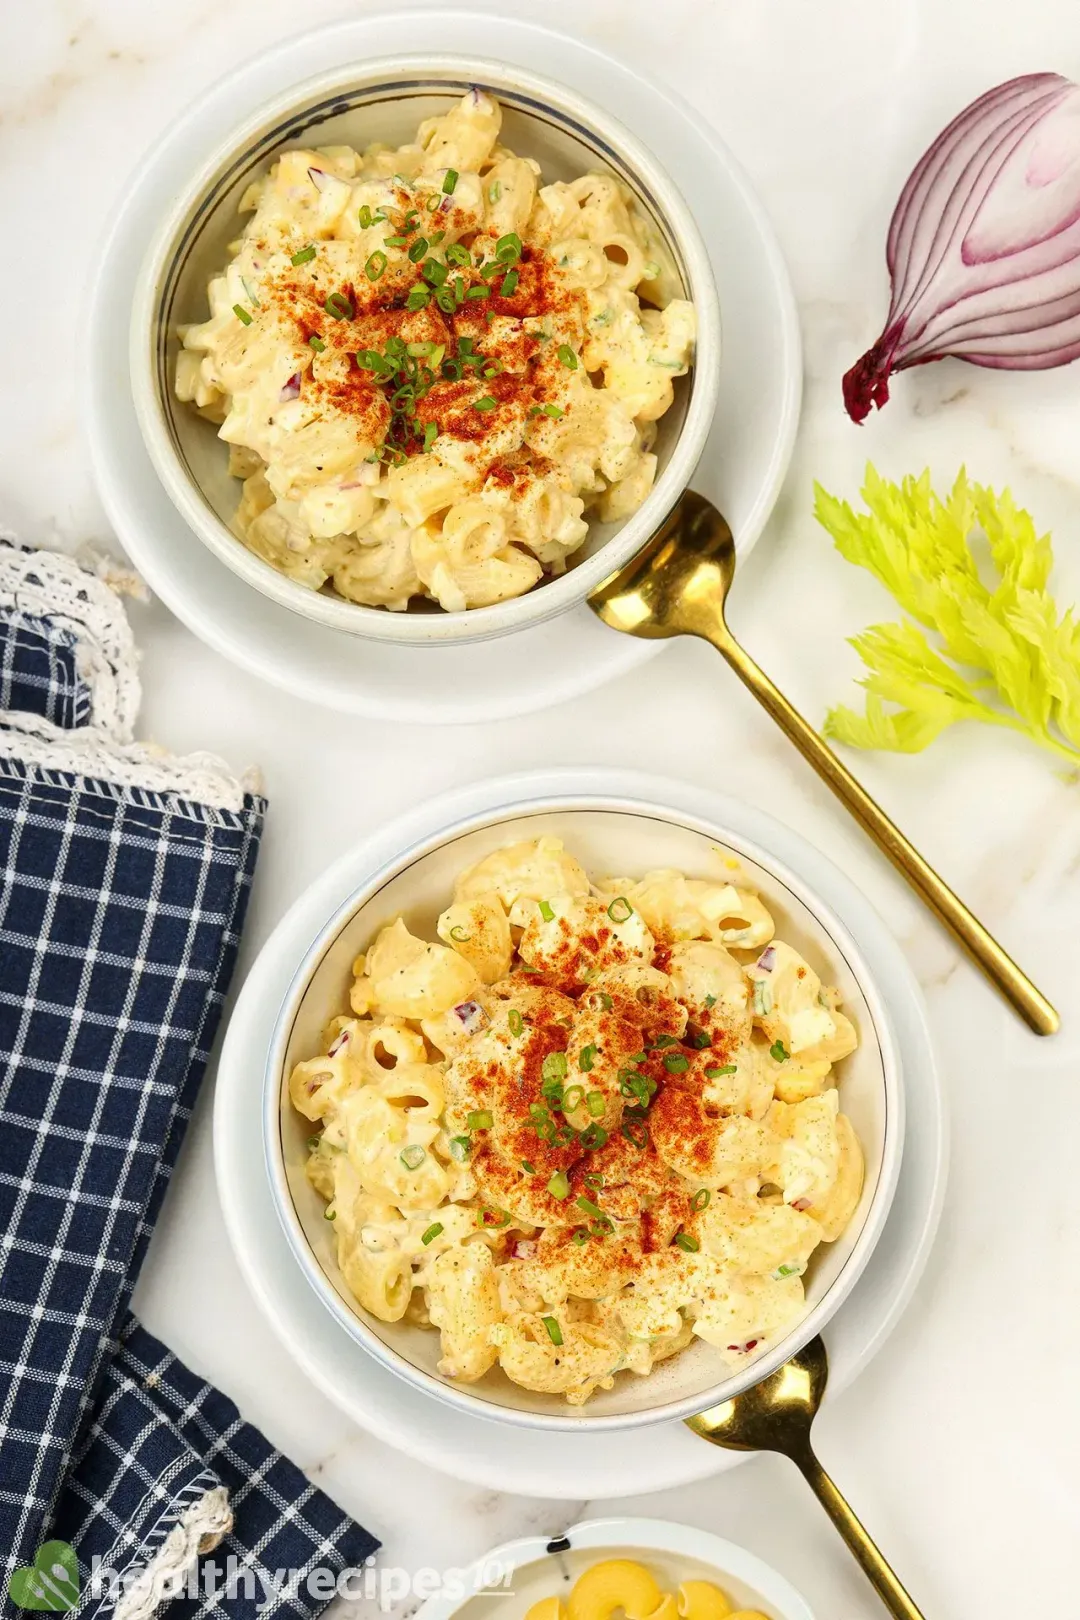 How to Store Leftovers Deviled Egg Pasta Salad